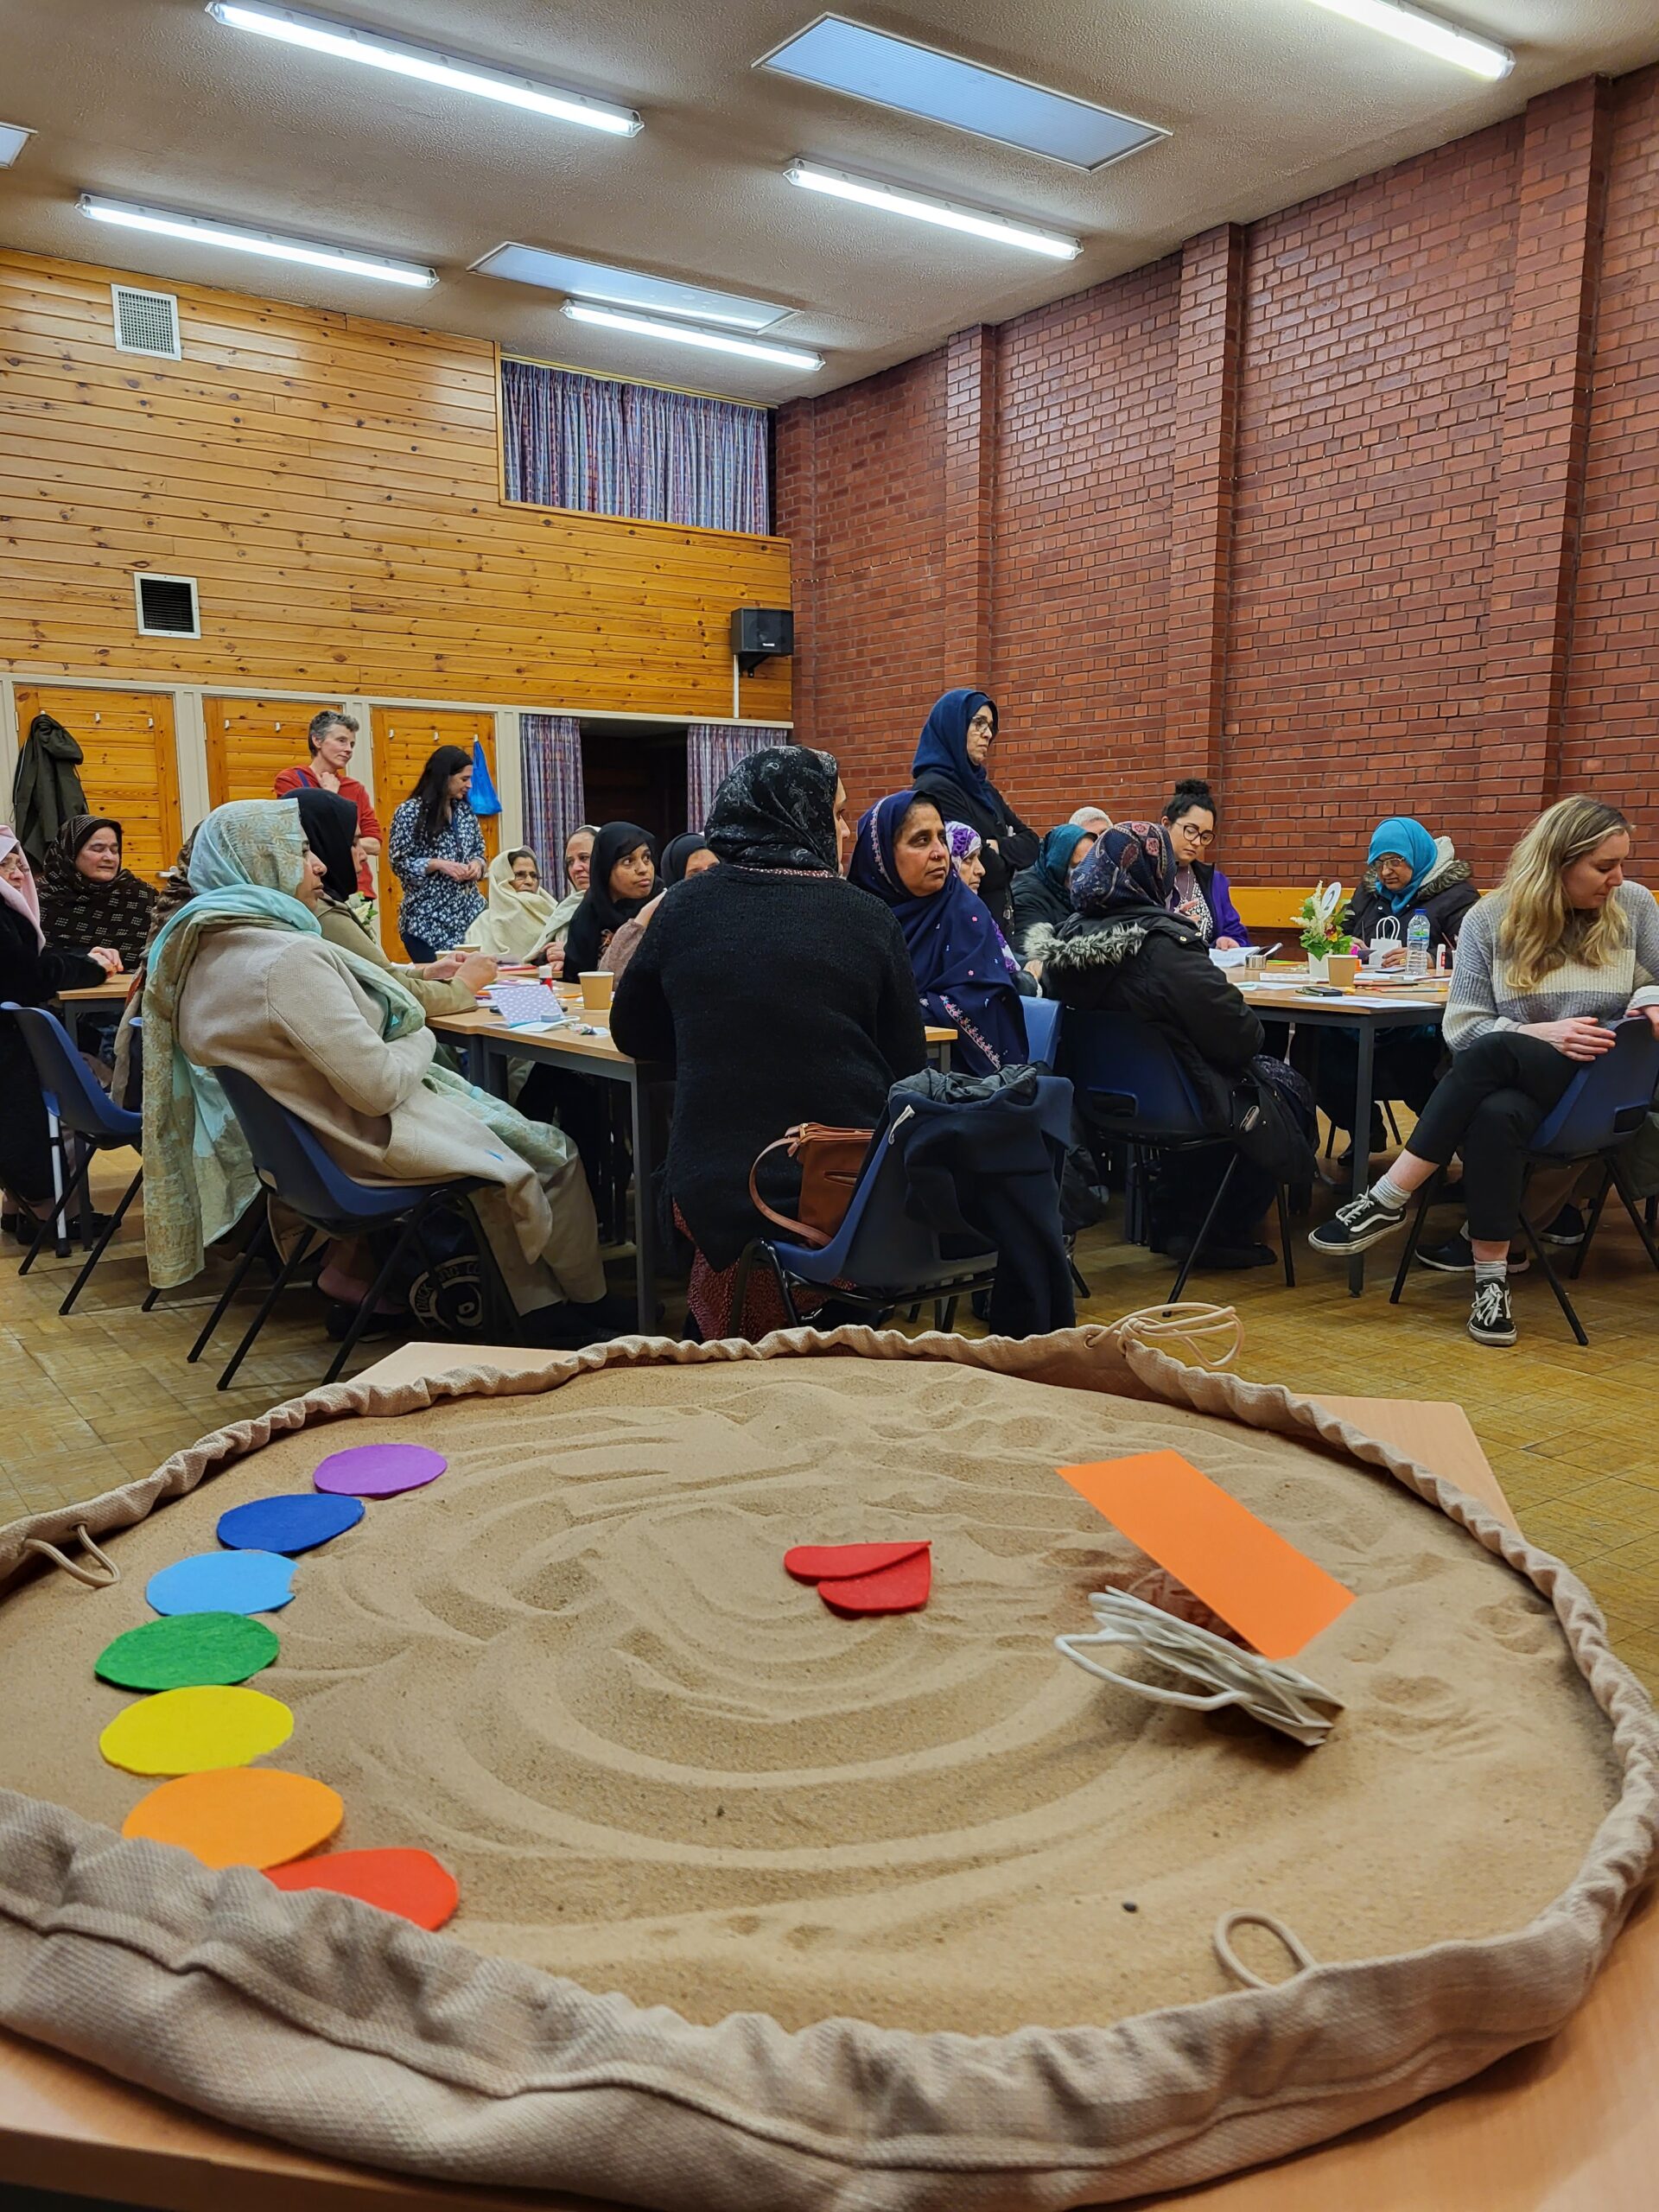 people seated around tables in a community hall, with some craft materials in front of them